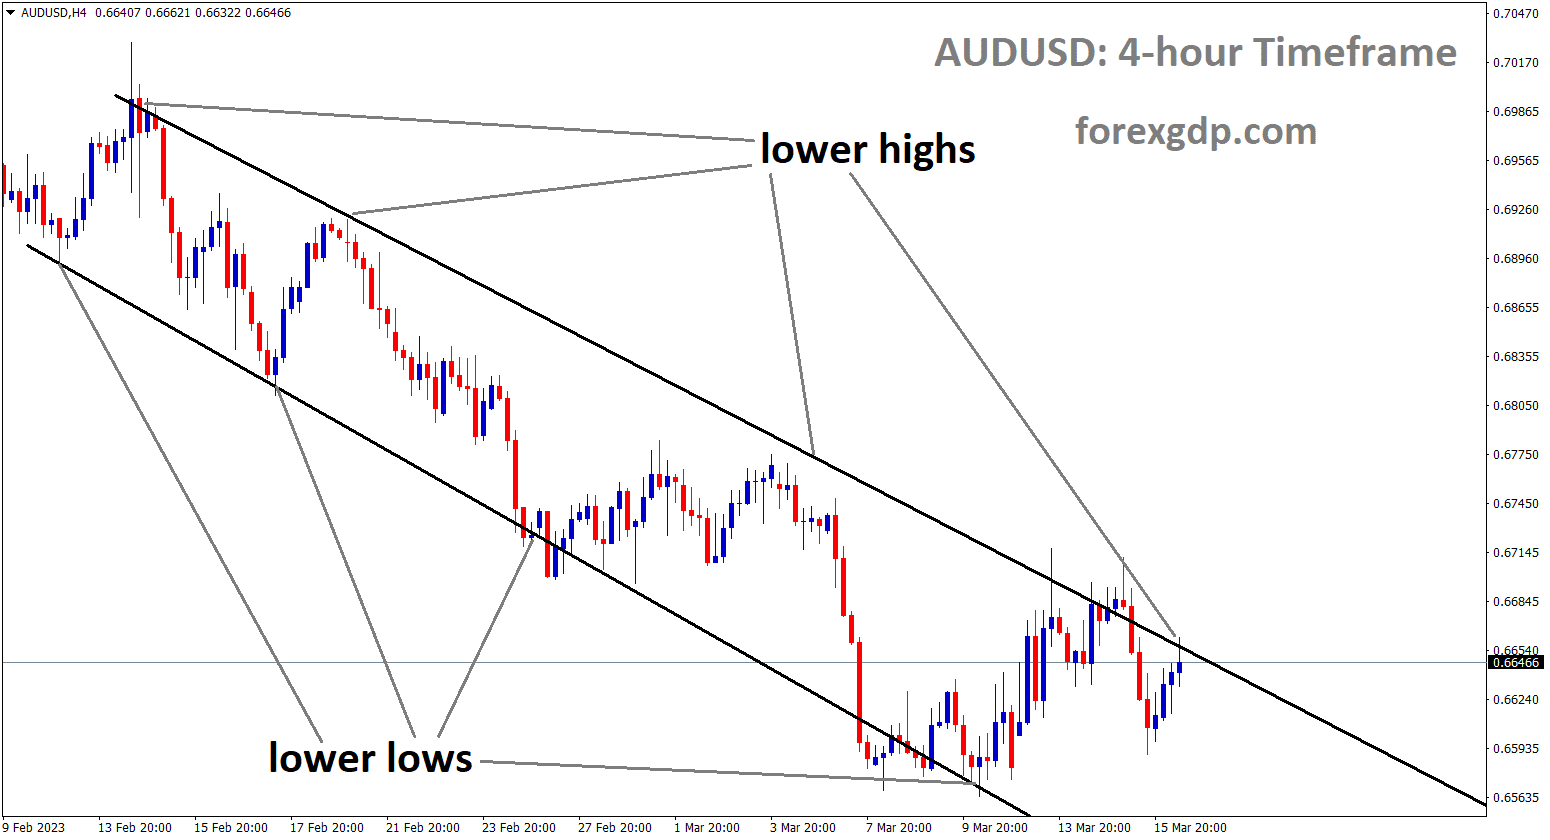 AUDUSD is moving in Descending channel and the market has reached the lower high area of the channel. 1